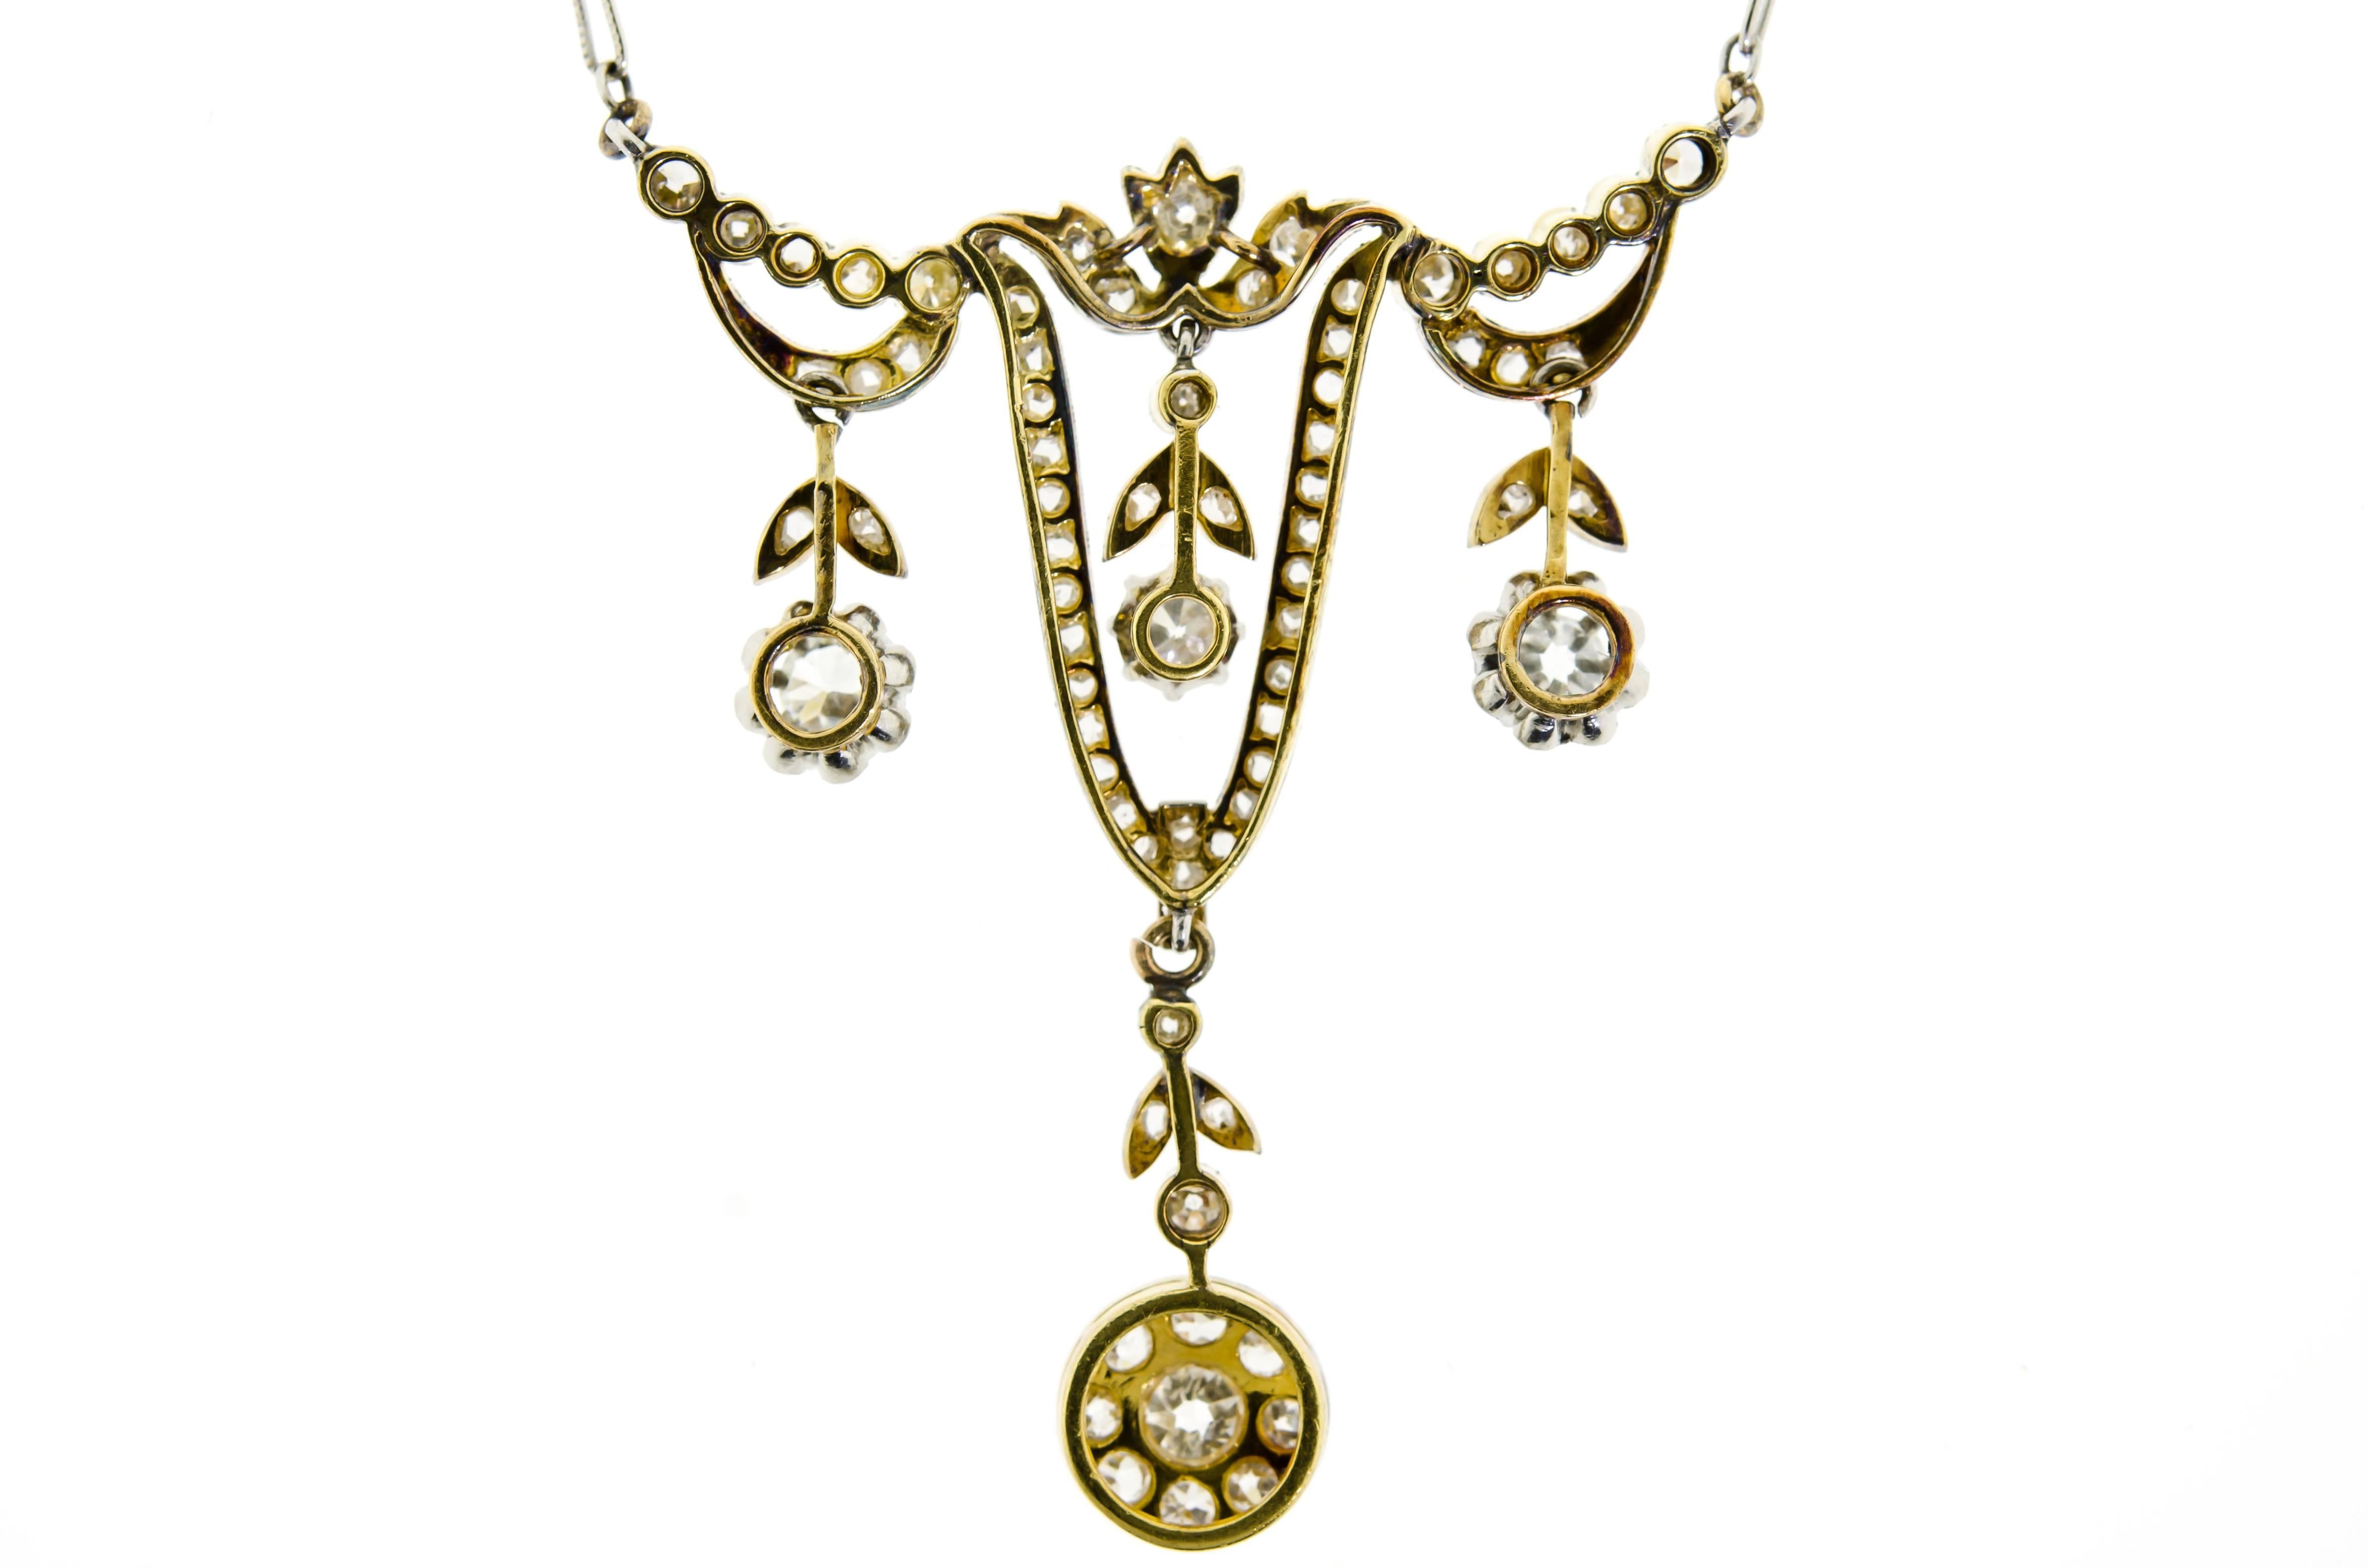 Edwardian turn of the century diamond and platinum topped yellow gold necklace - swag style with four drops - diamond platinum topped yellow gold with 14K white gold fancy link chain sping ring clasp. Overall approximate total diamond carat weight